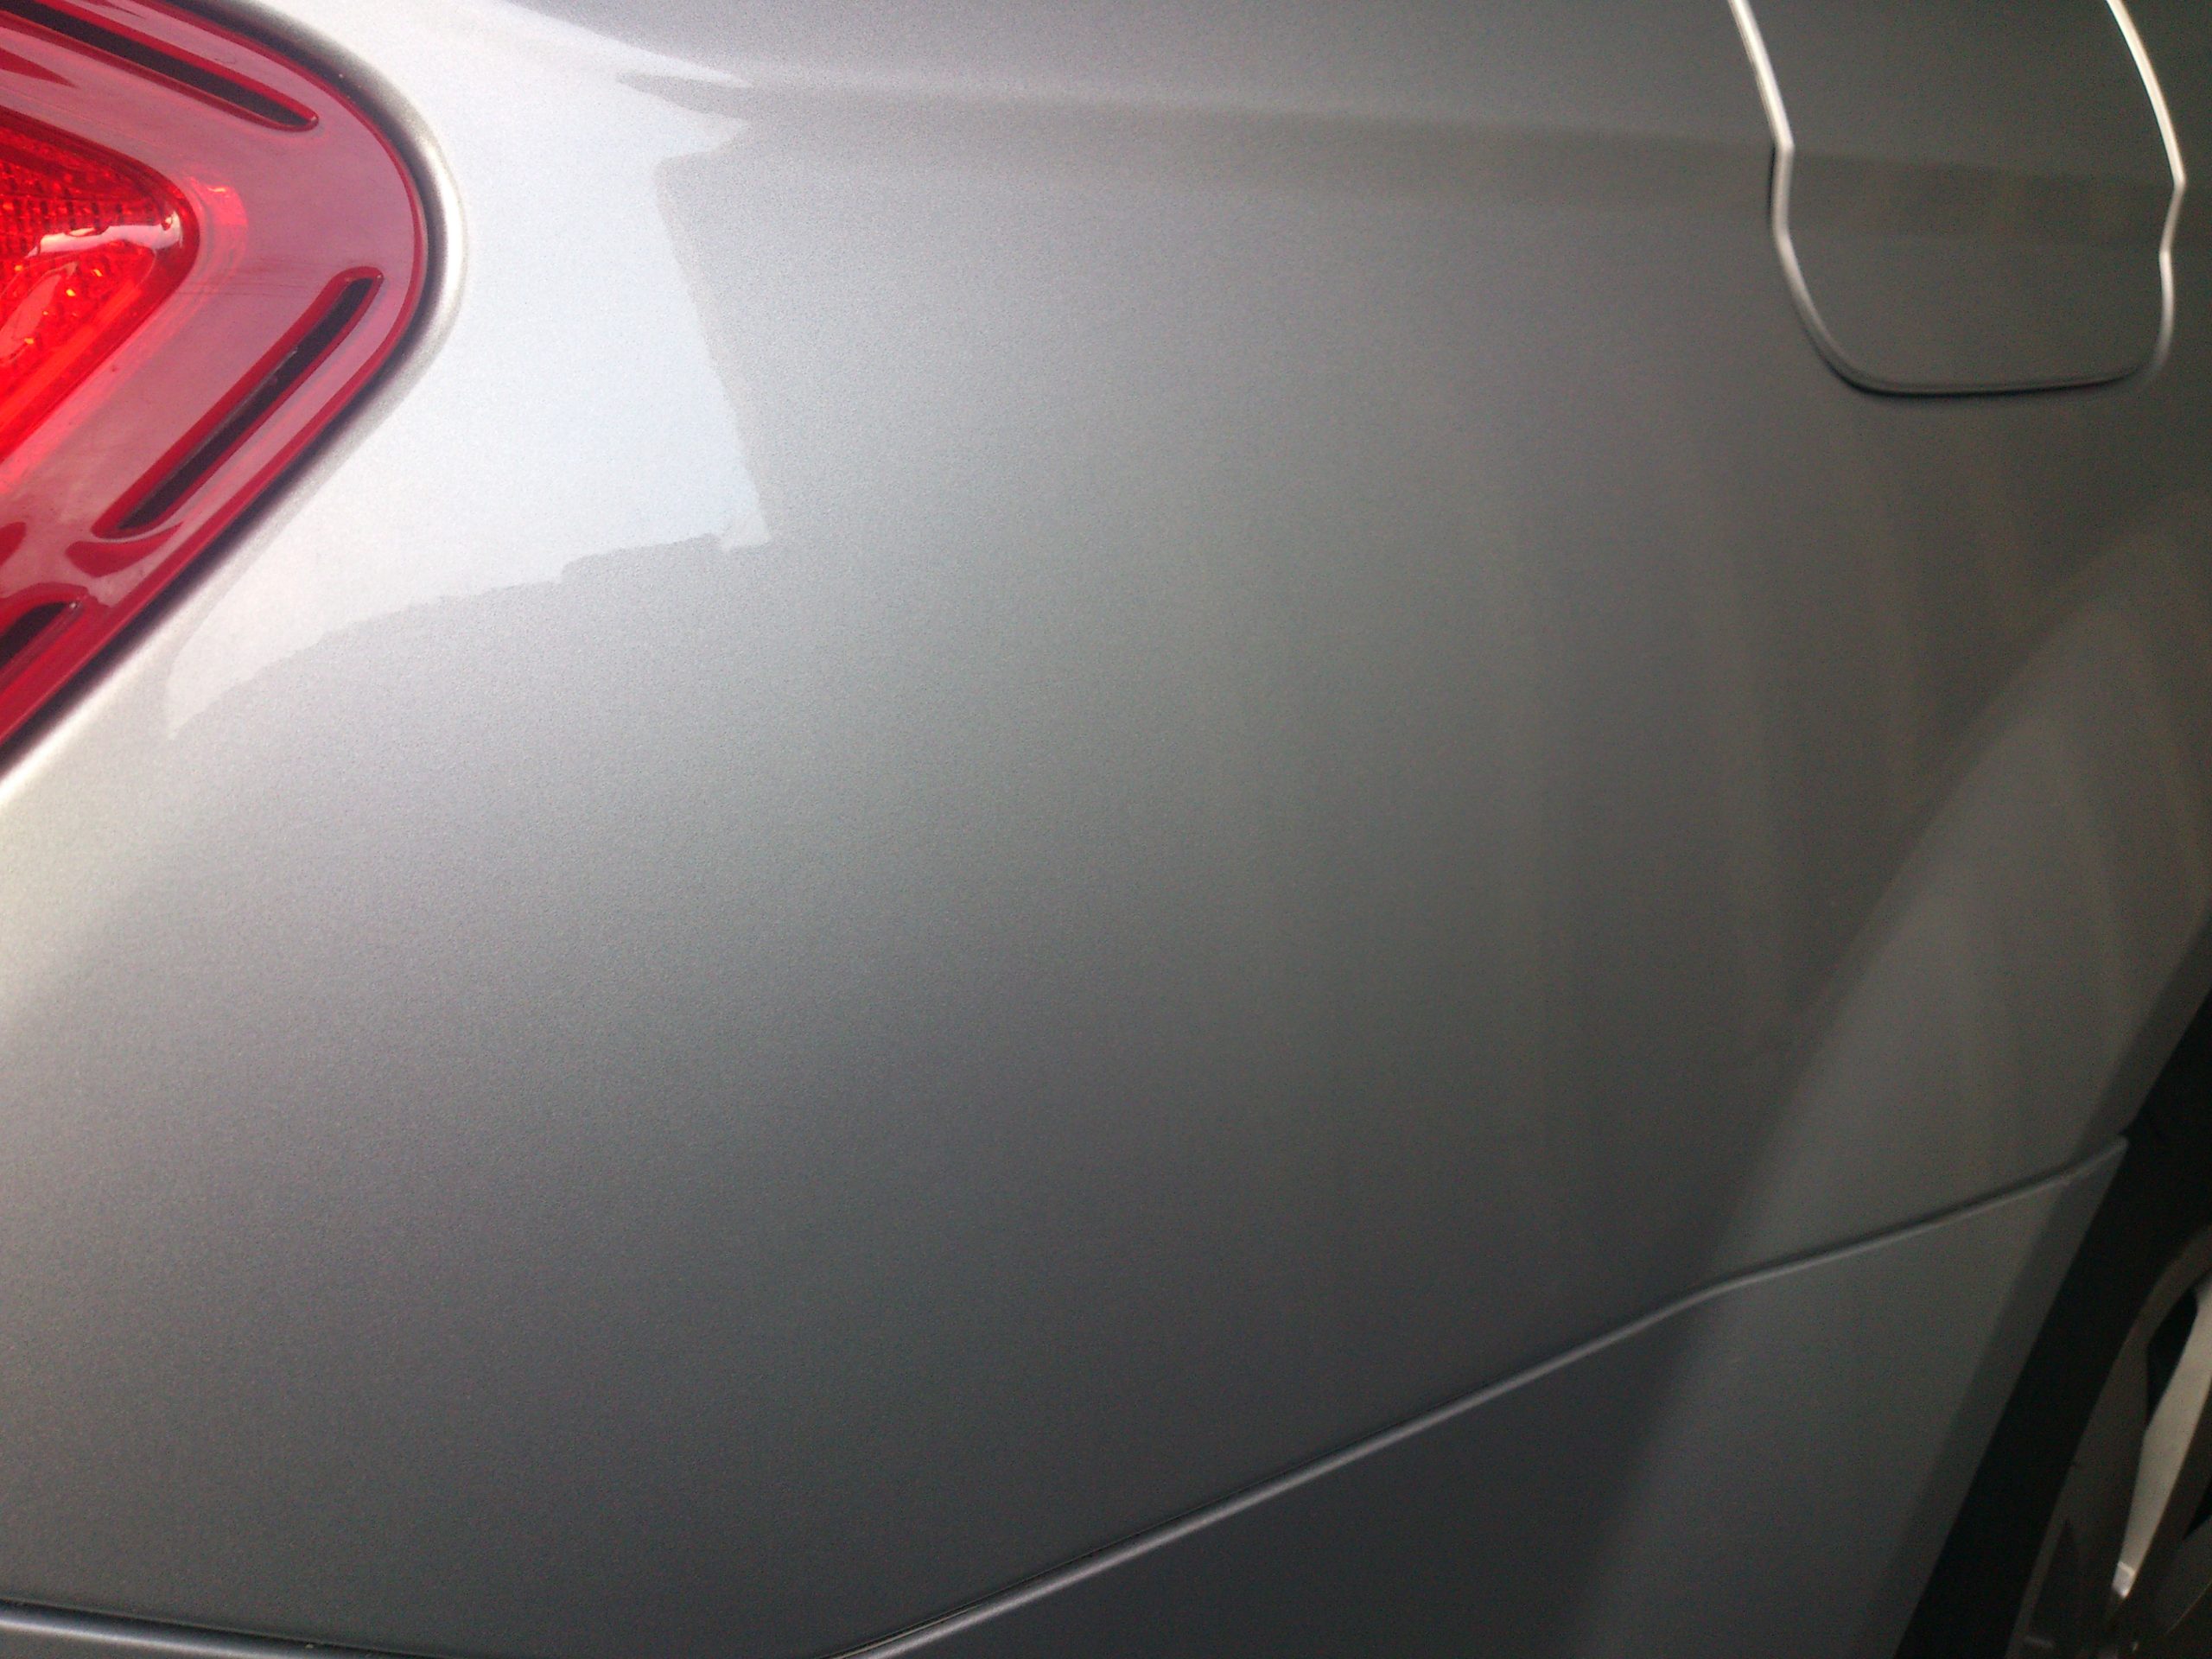 Quarter Panel Repaired with PDR